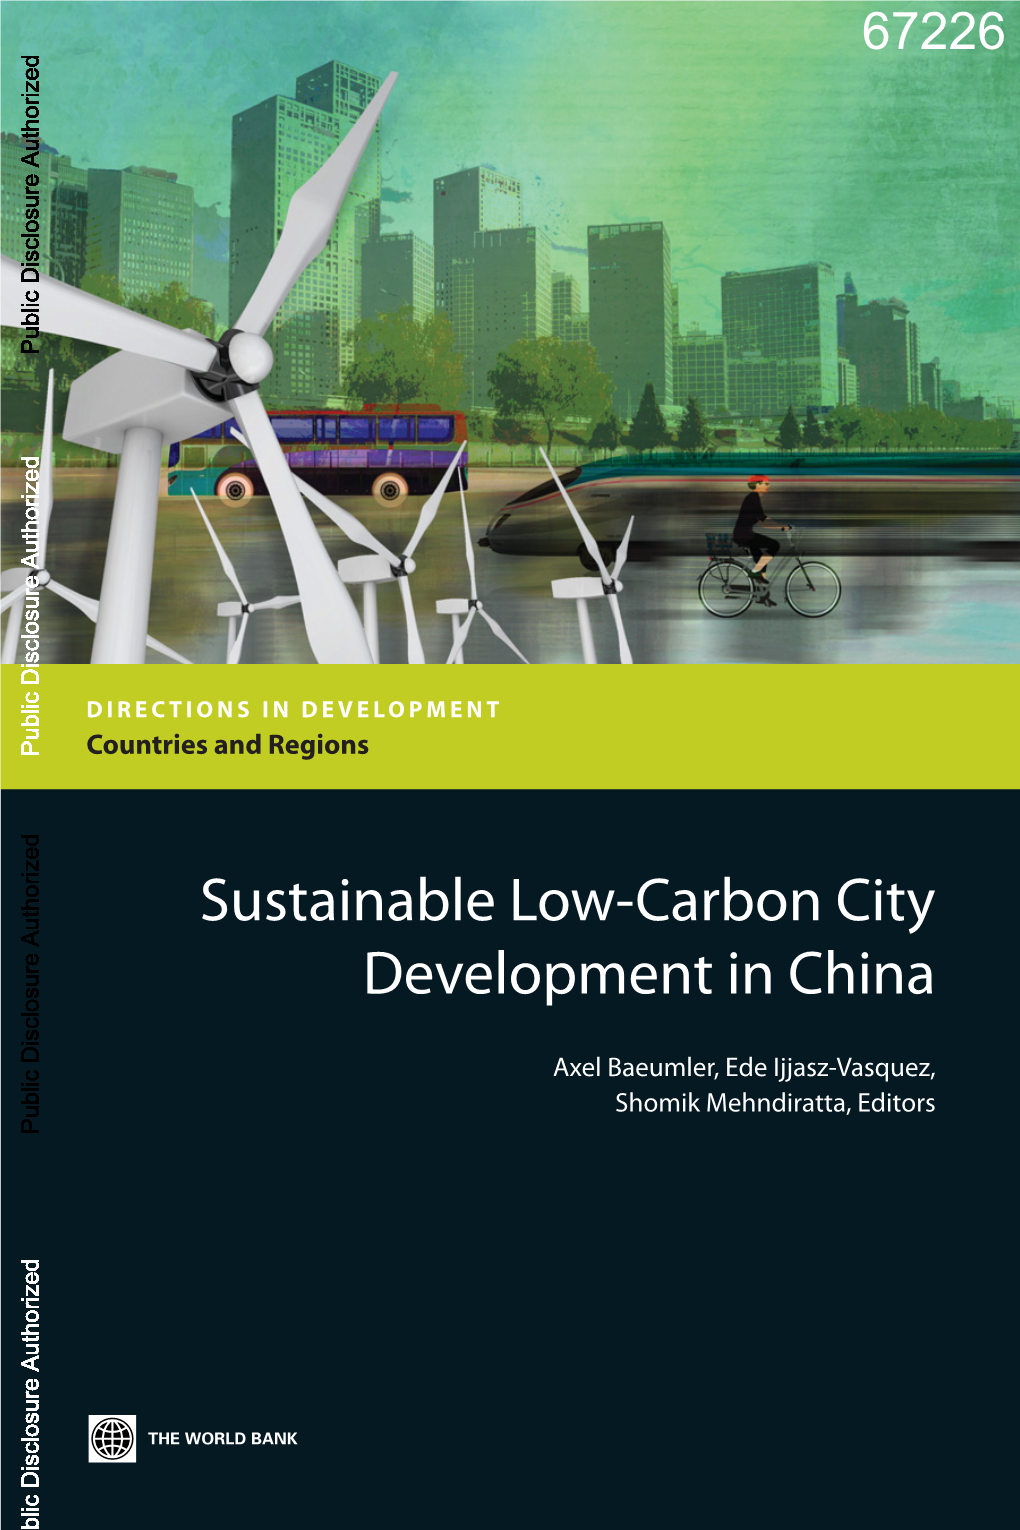 Sustainable Low-Carbon Cities in China: Why It Matters and What Can Be Done Xxxix Axel Baeumler, Ede Ijjasz-Vasquez, and Shomik Mehndiratta